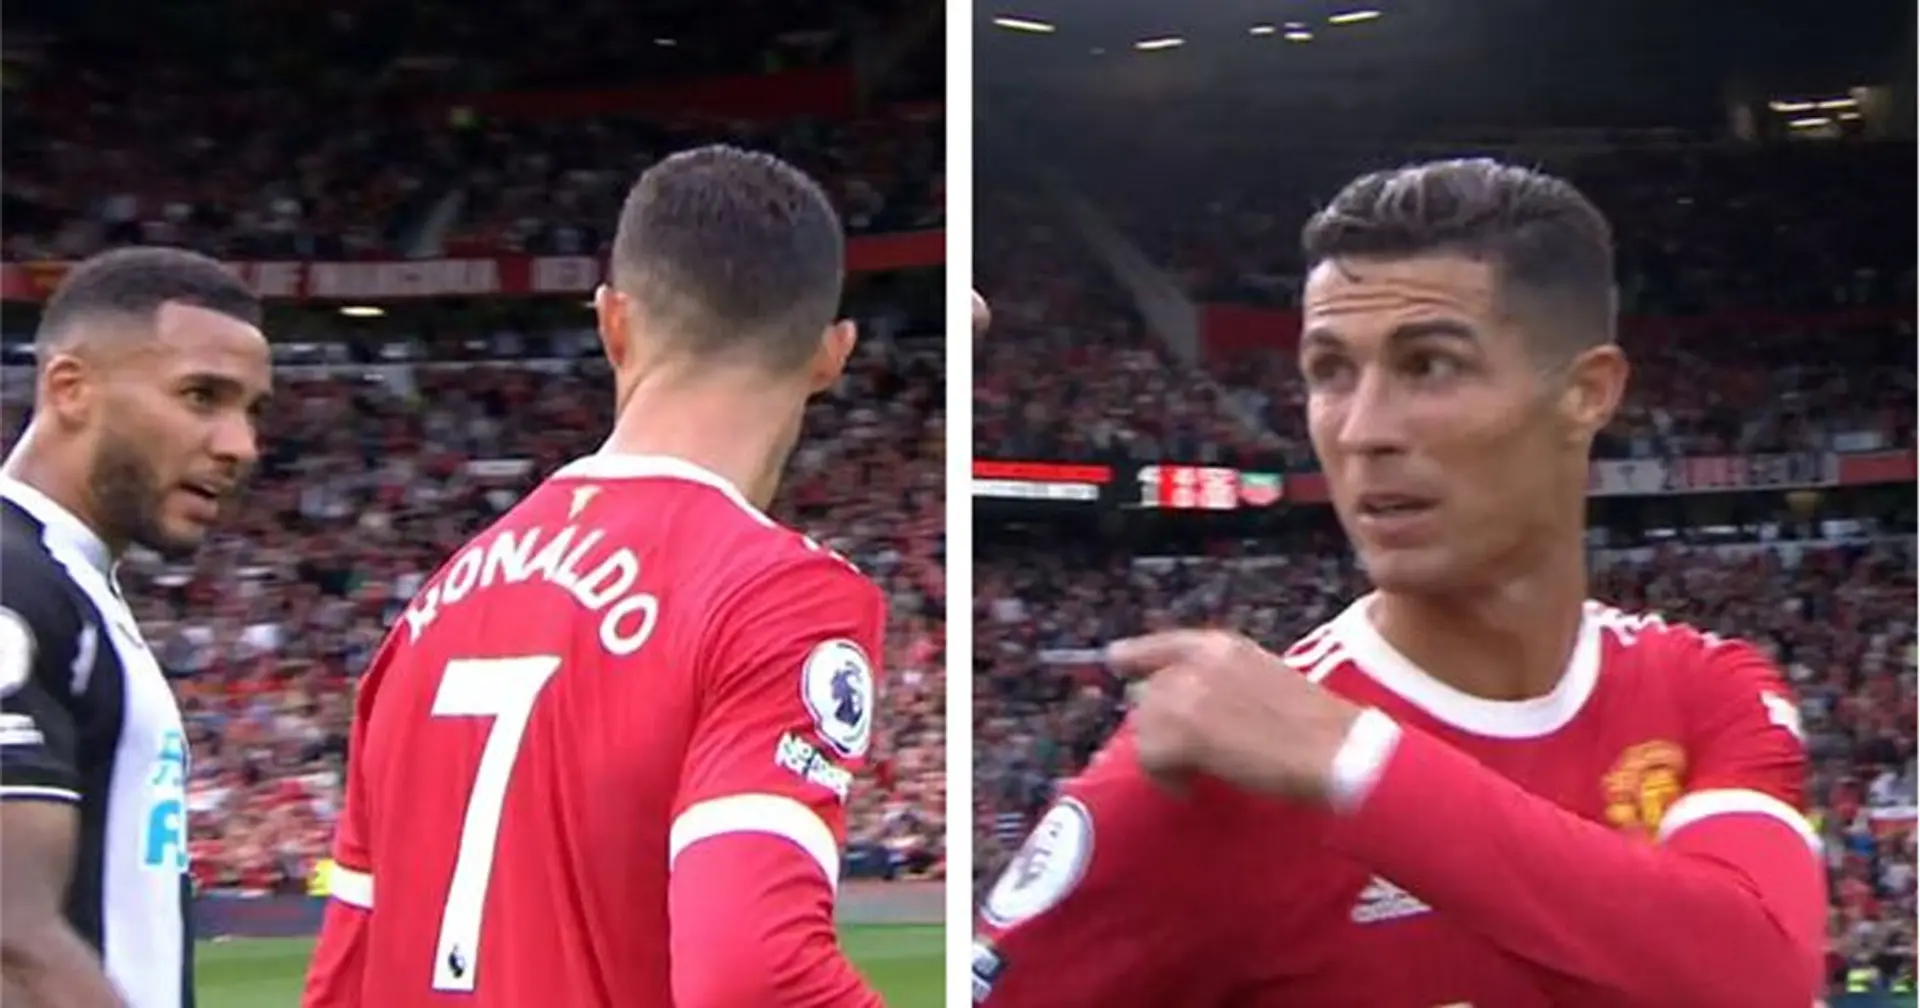 Two Newcastle players approach Cristiano to swap shirts – Ronaldo's reaction caught on camera